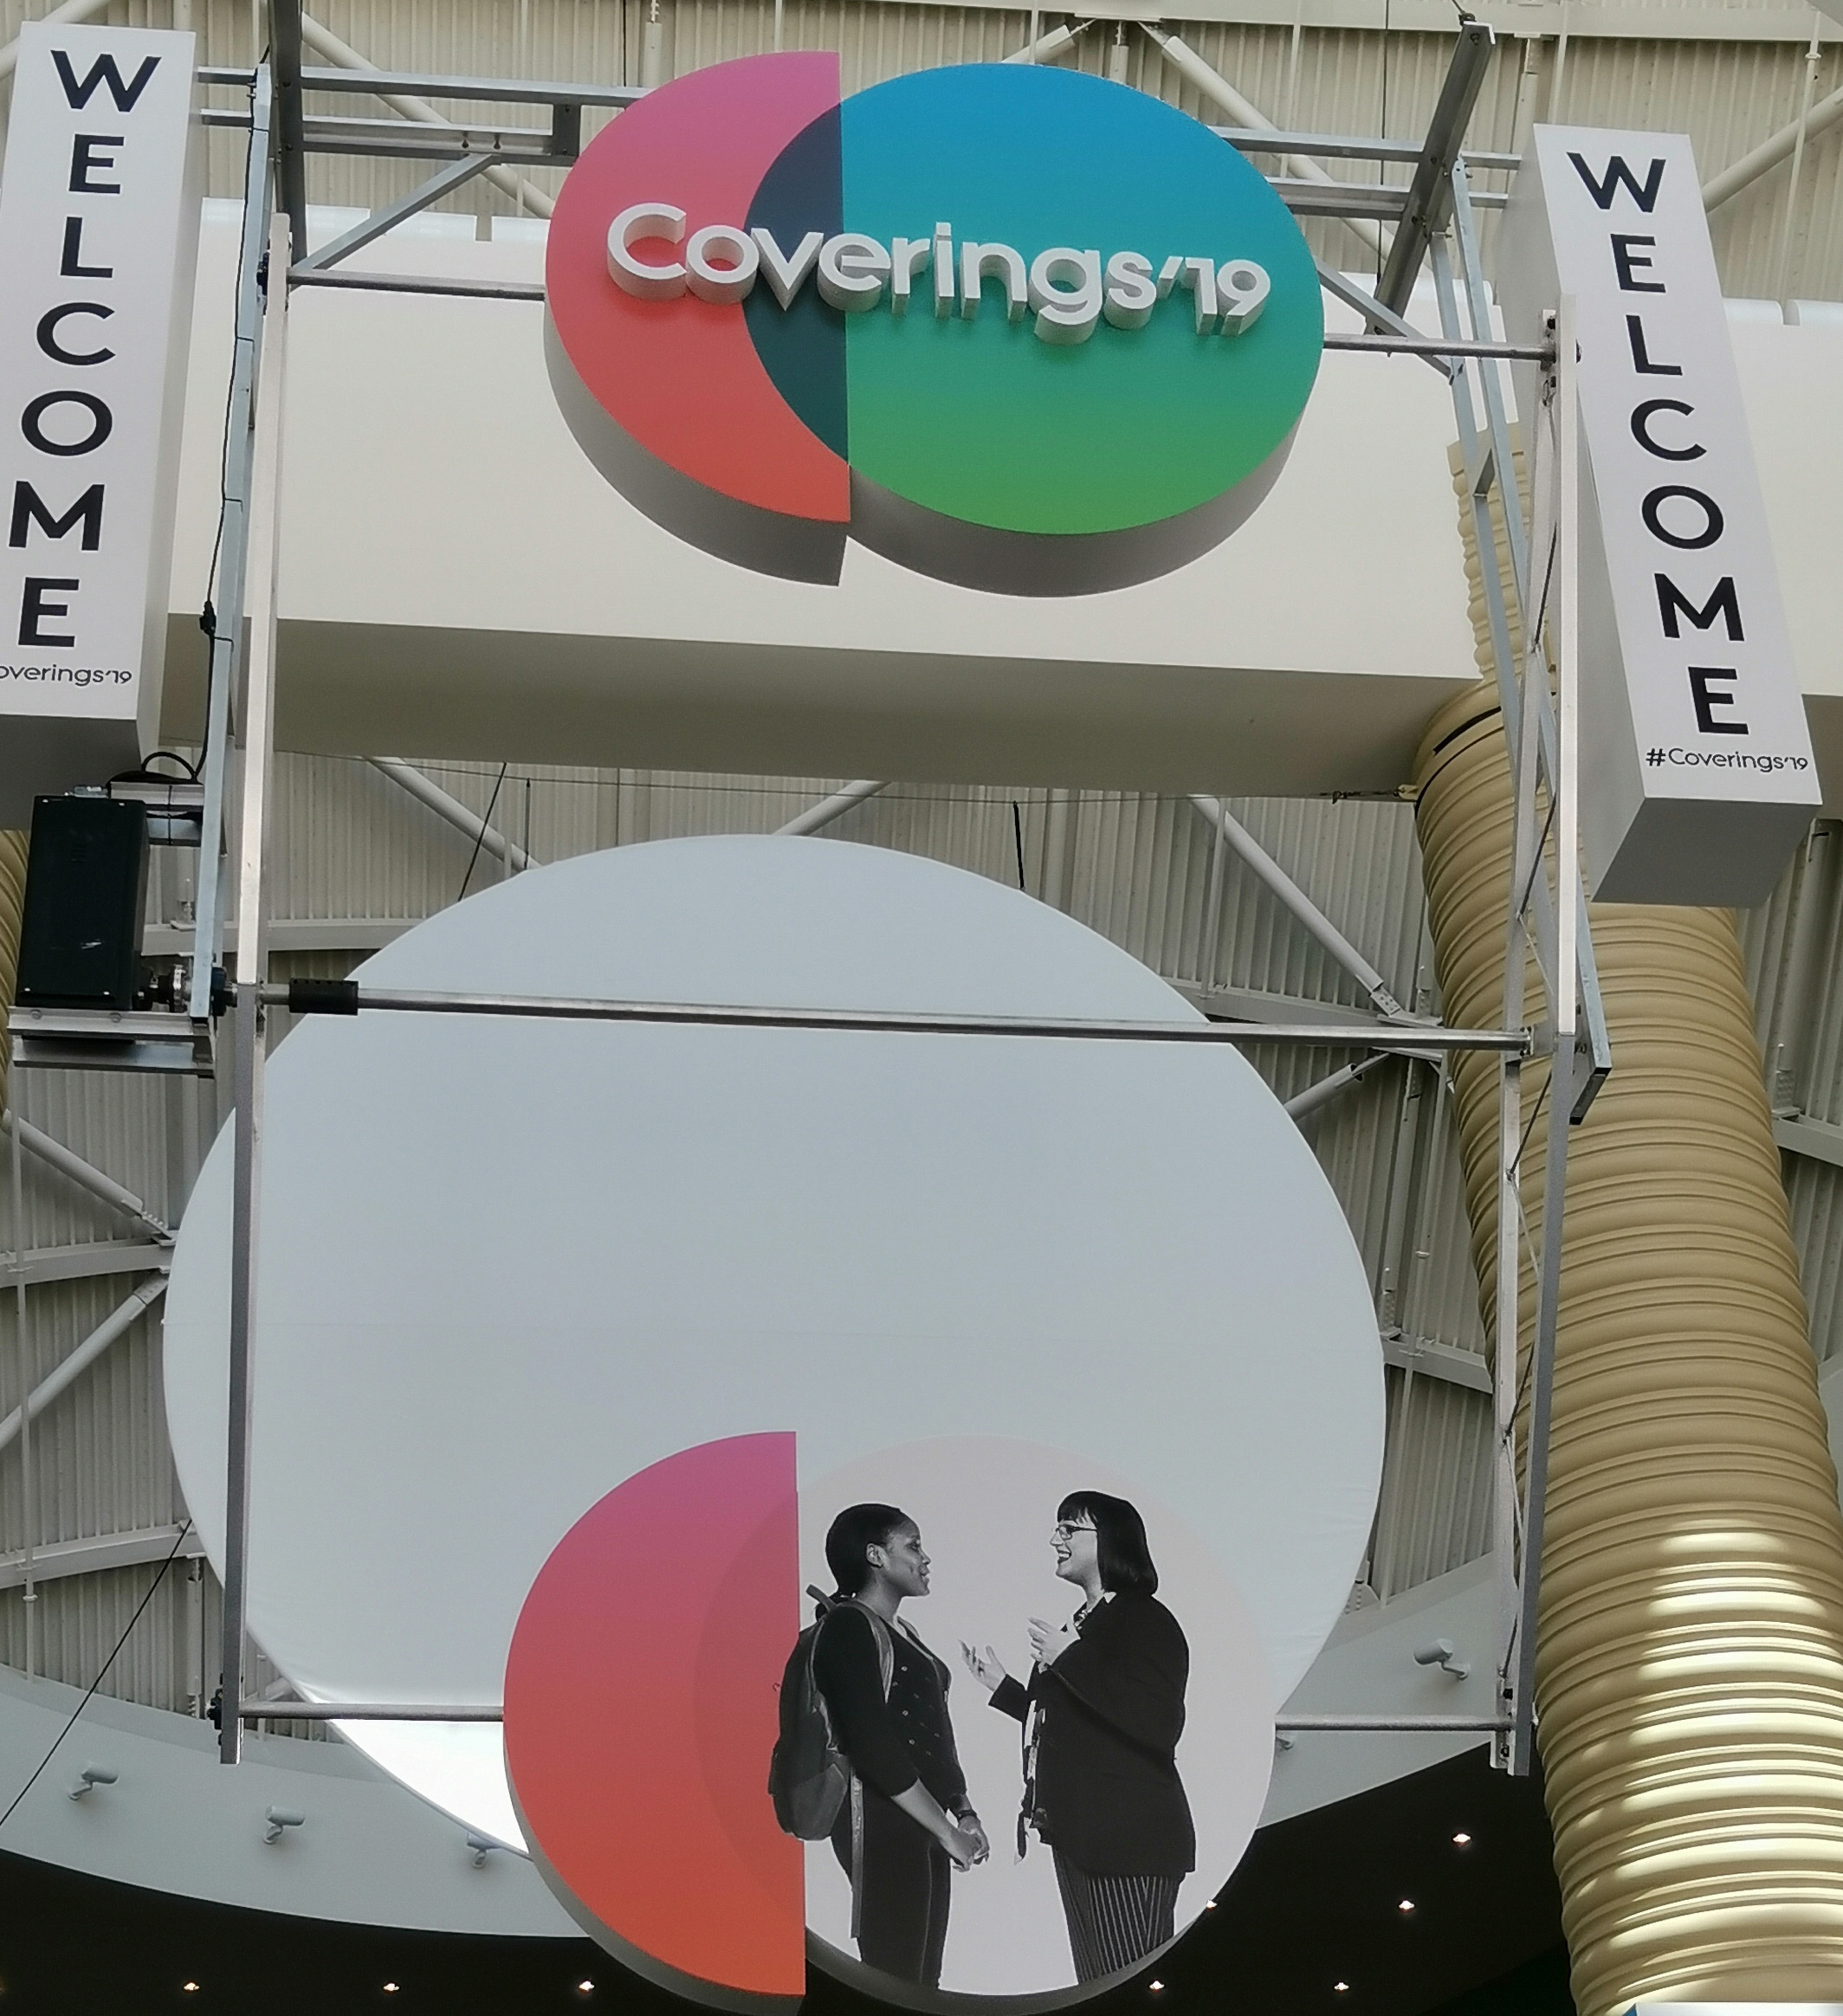 COVERINGS 2019, Nice to be with you again.